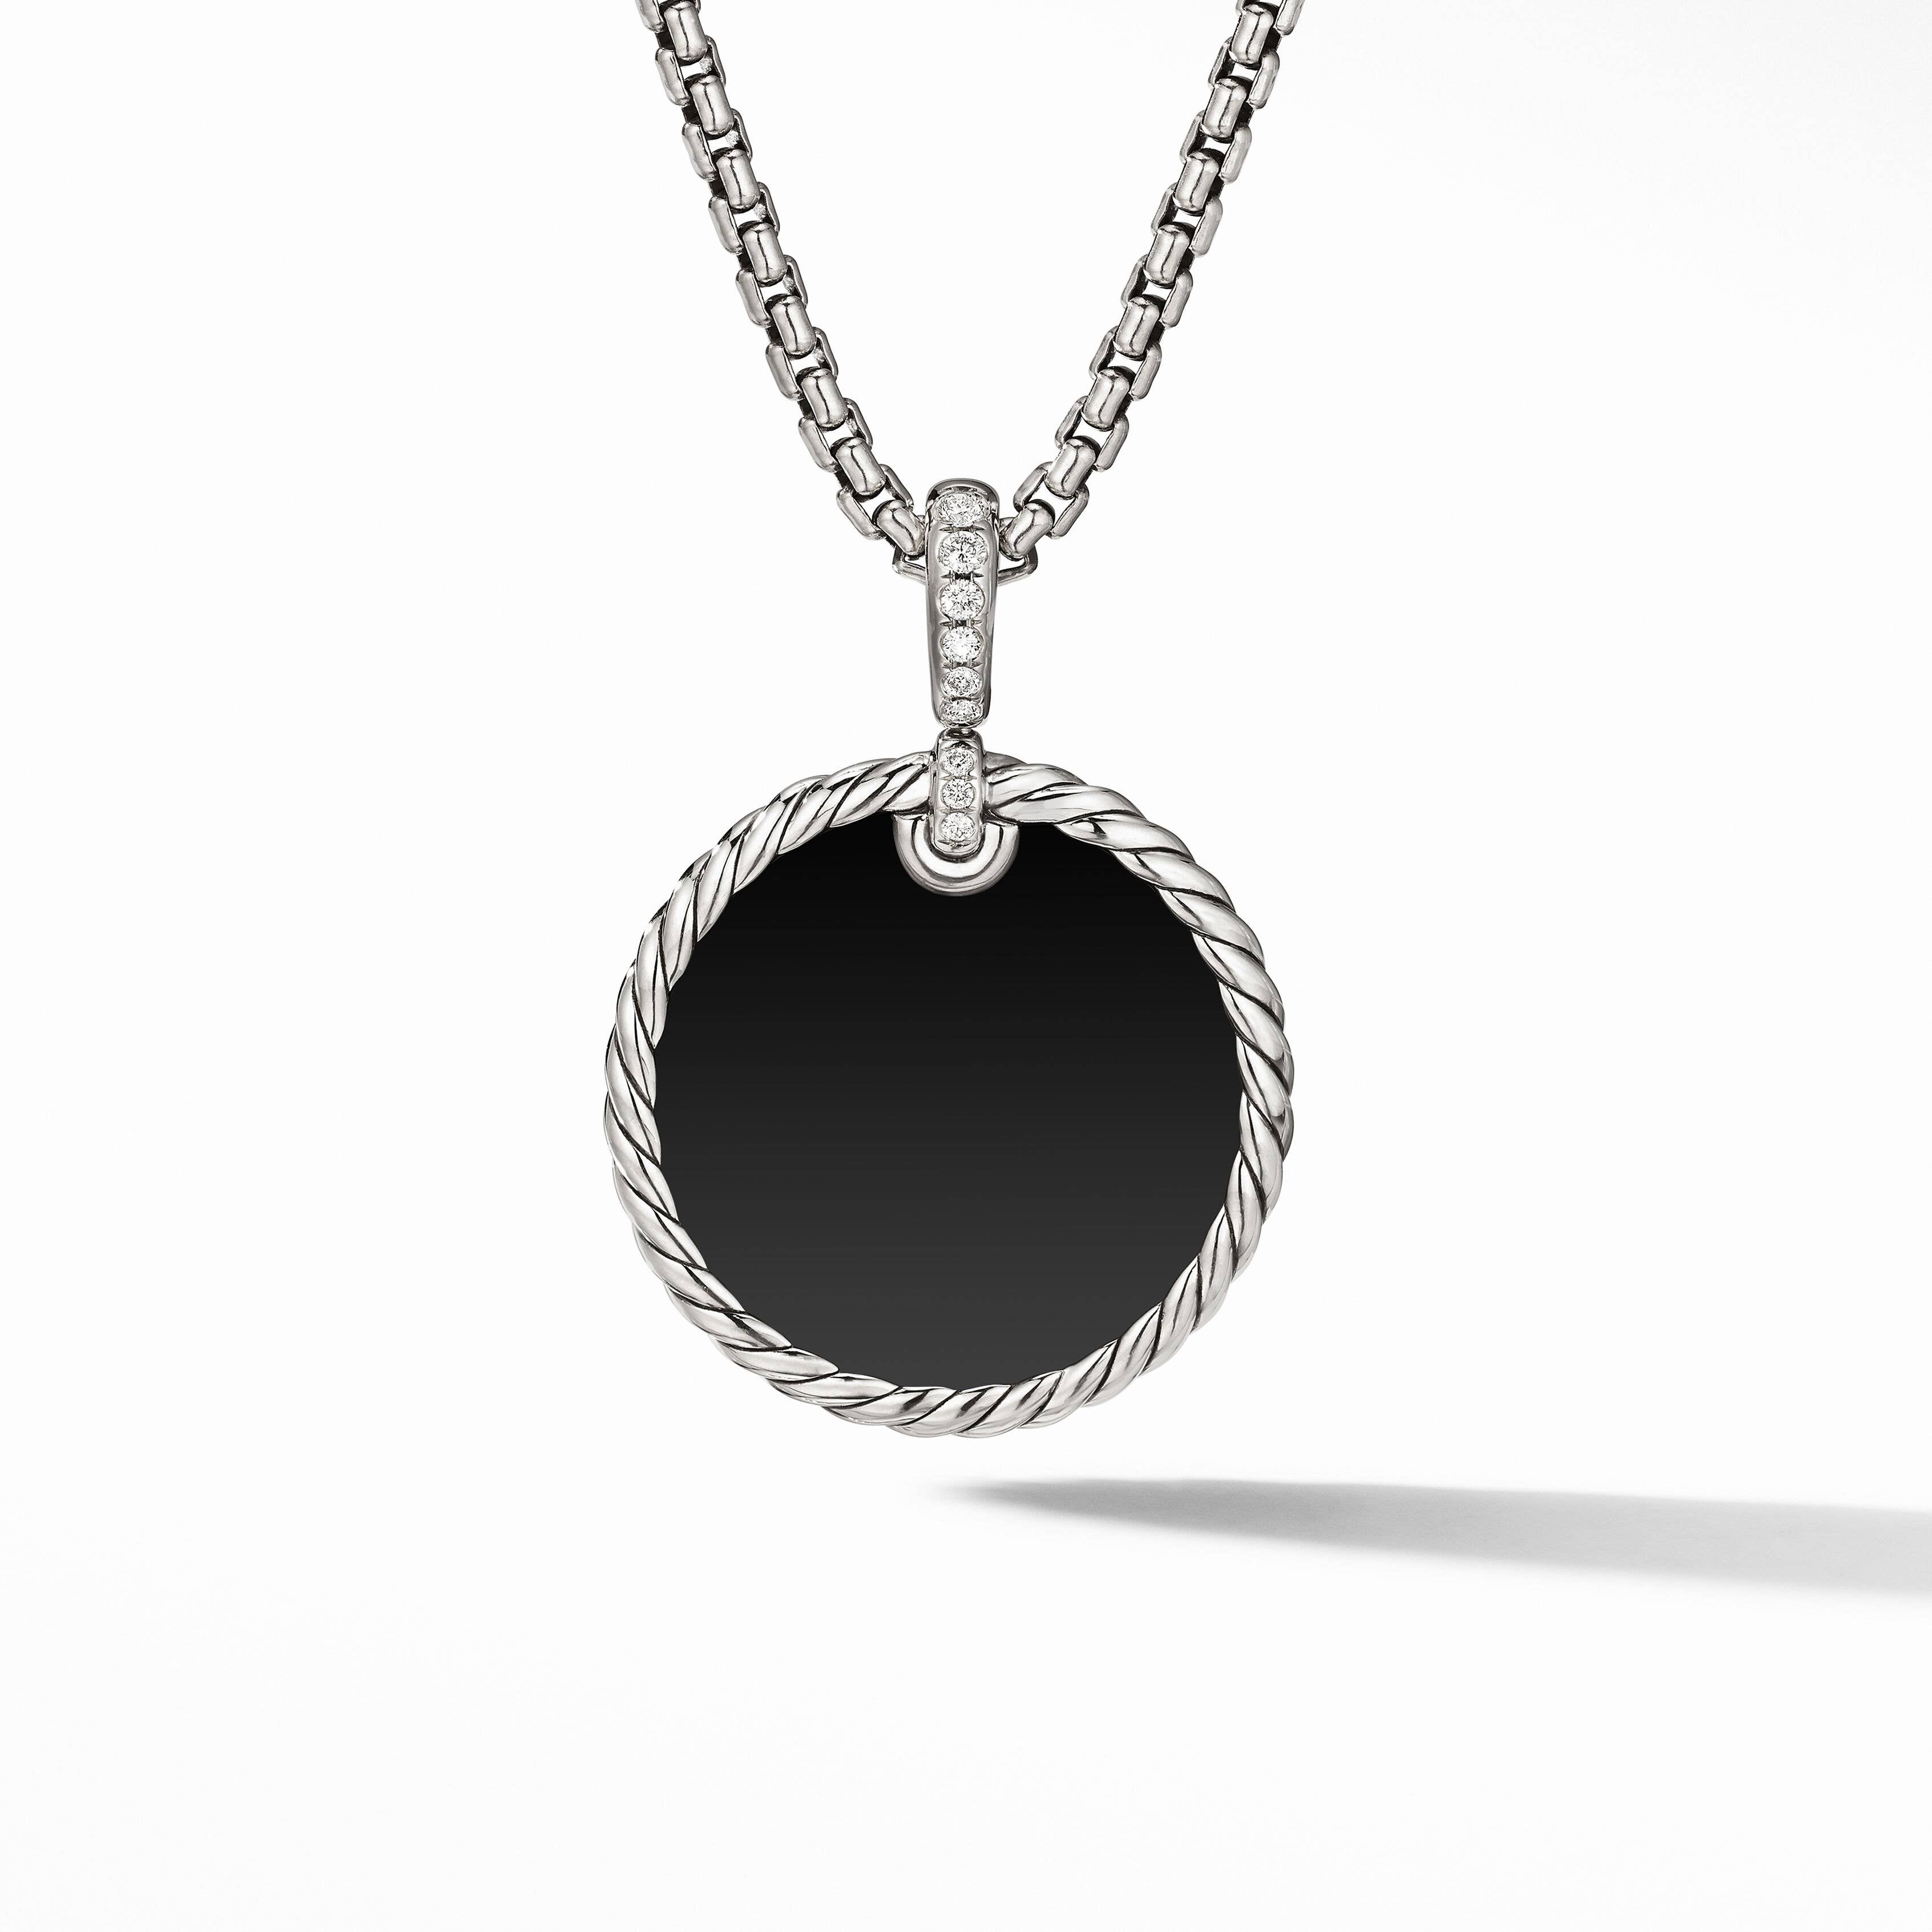 DY Elements® Disc Pendant with Black Onyx Reversible to Mother of Pearl and Pavé Diamonds